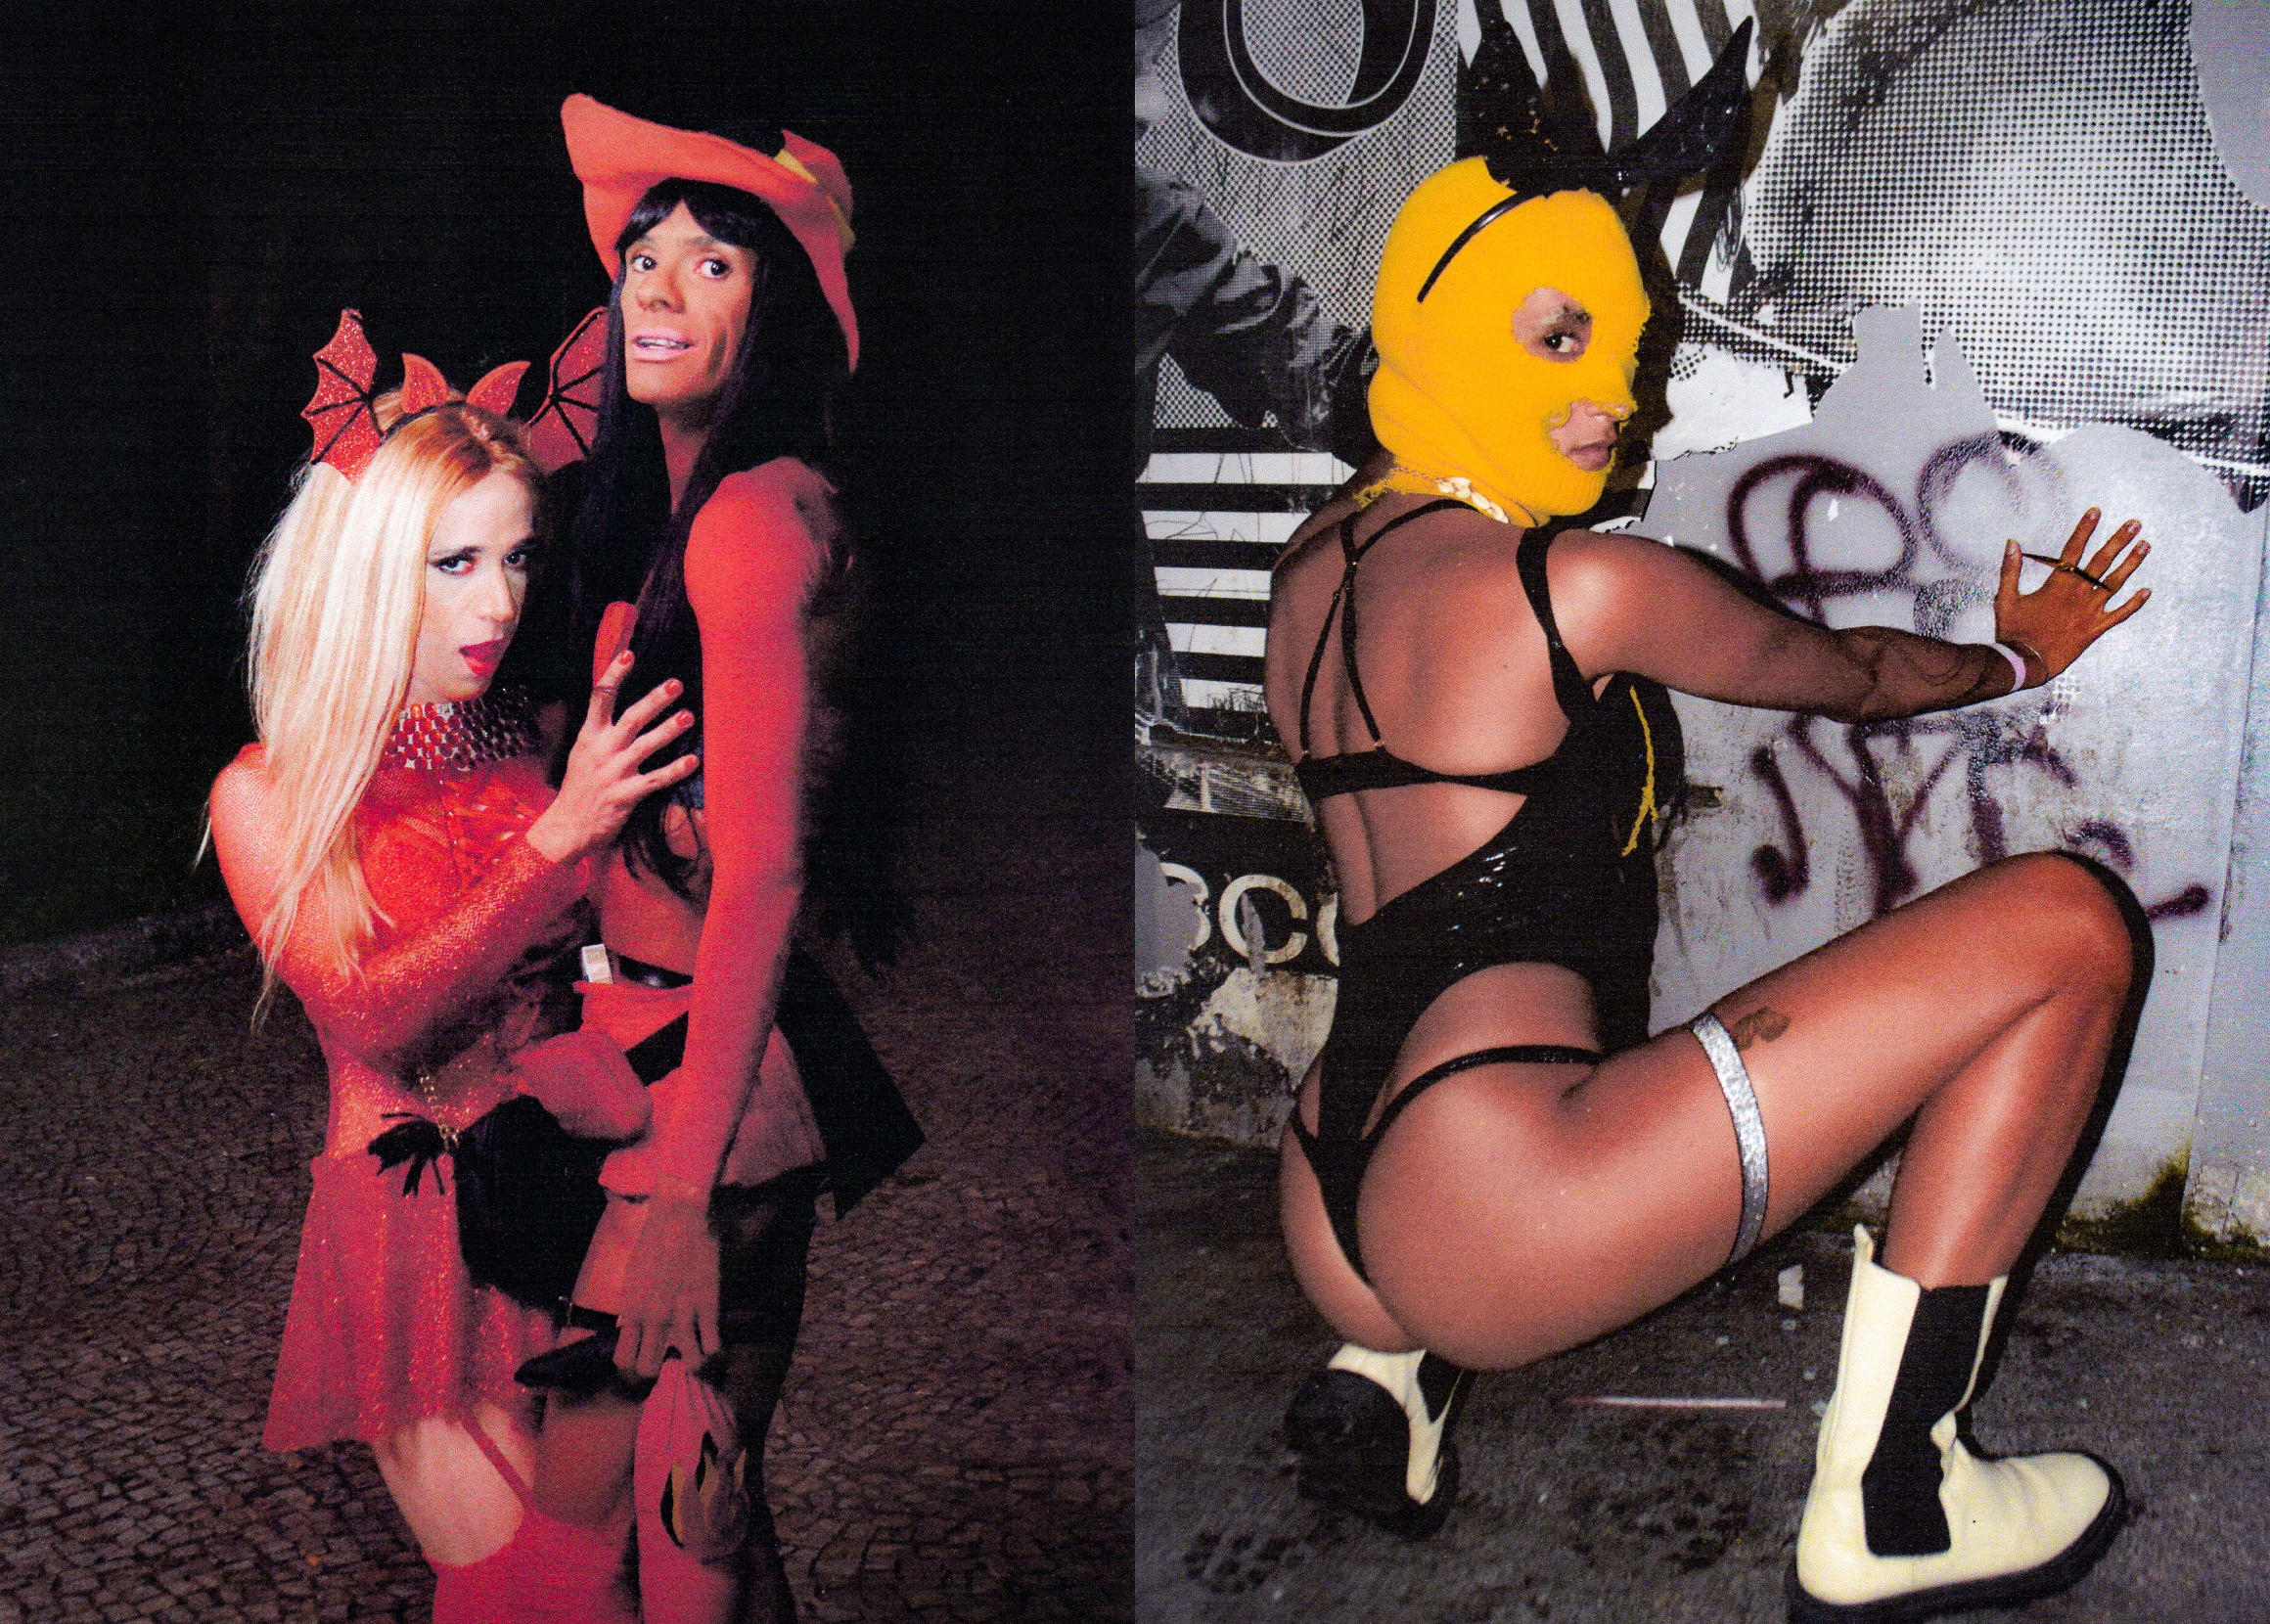 clubbers wearing red costumes hold each other suggestively (L) black underwear with a yellow balaclava (R)